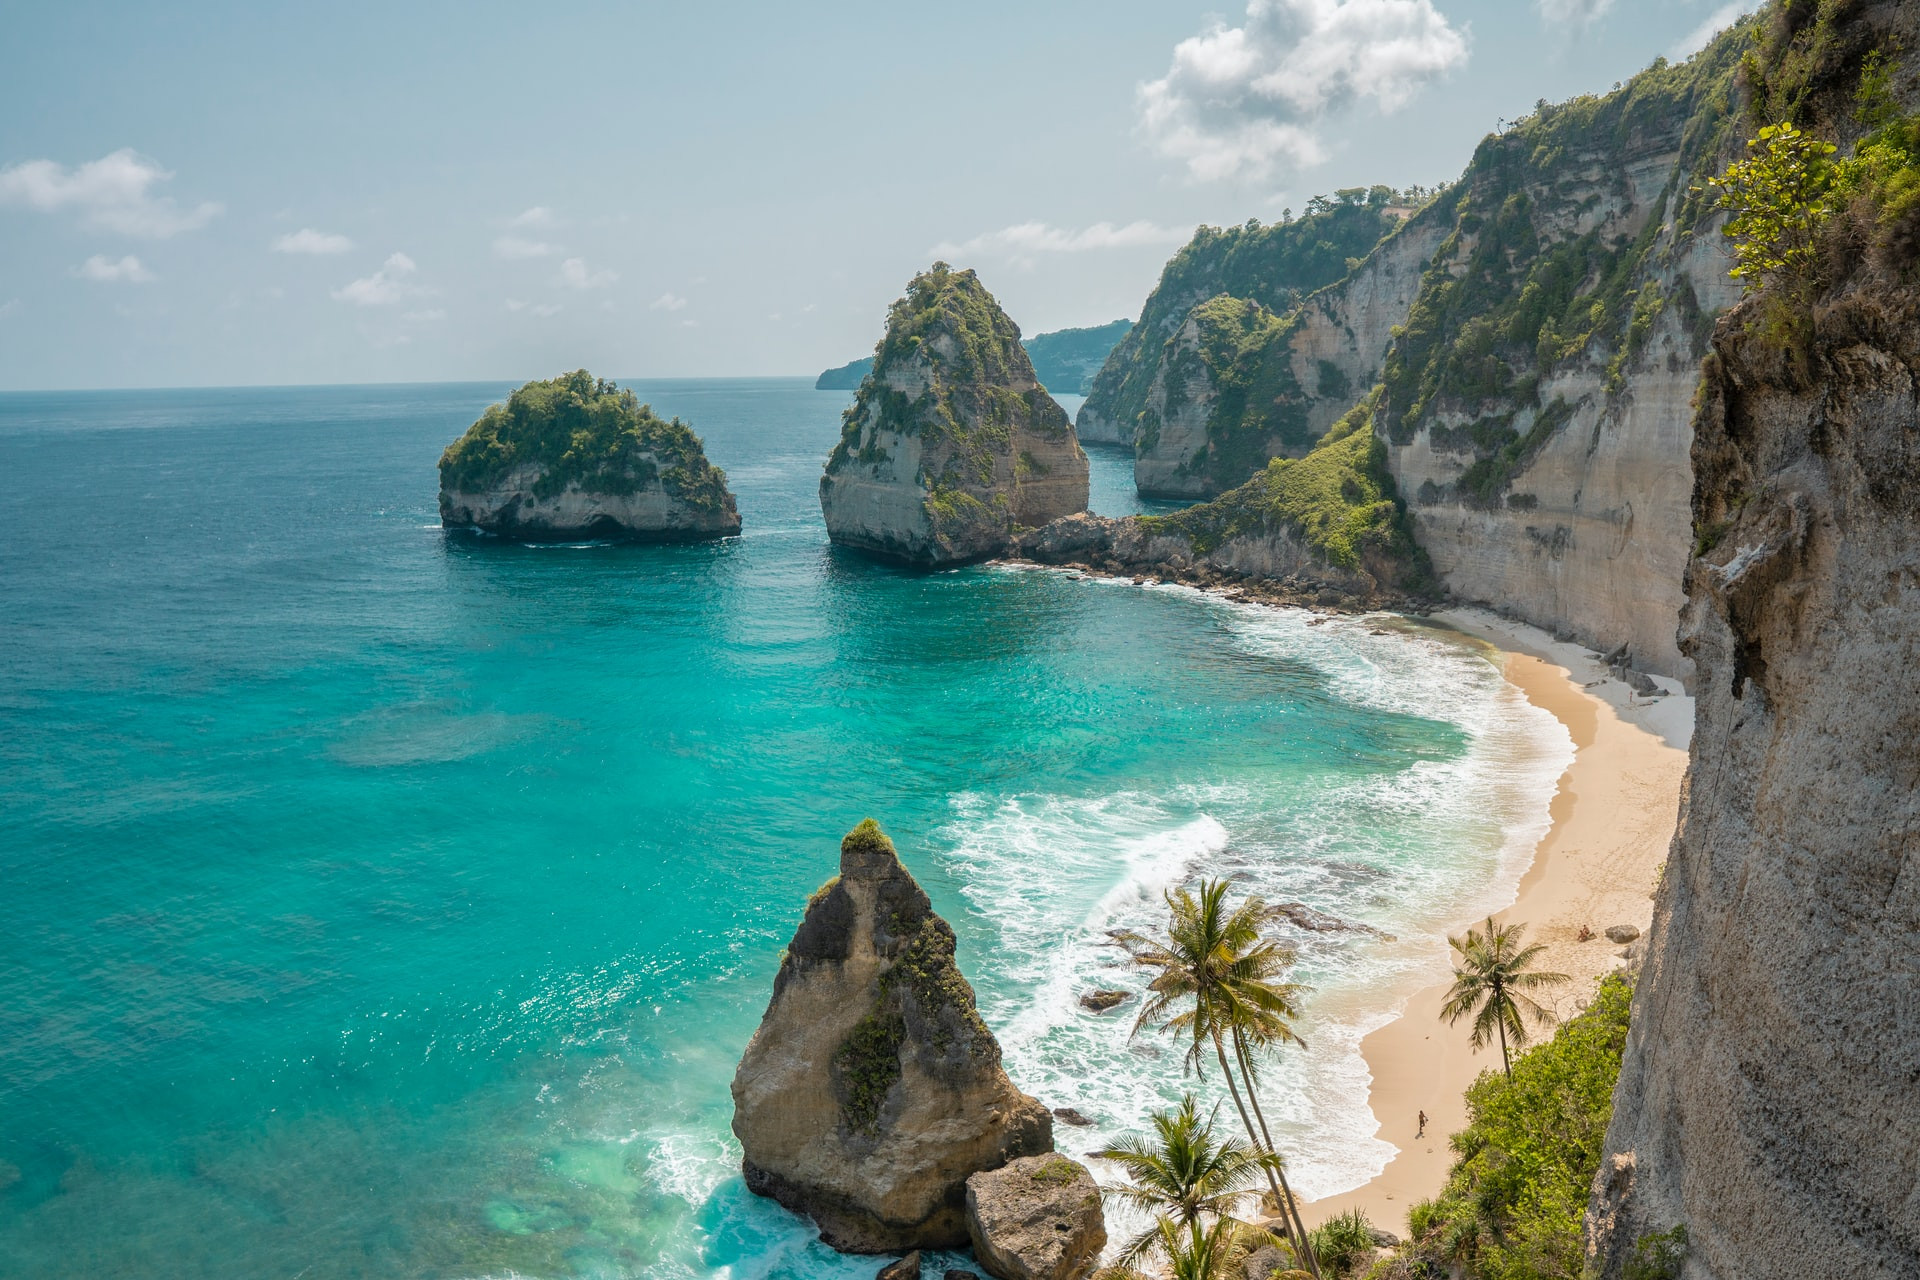 Ferry to Nusa Penida schedules, prices and online tickets - Asia Ferries